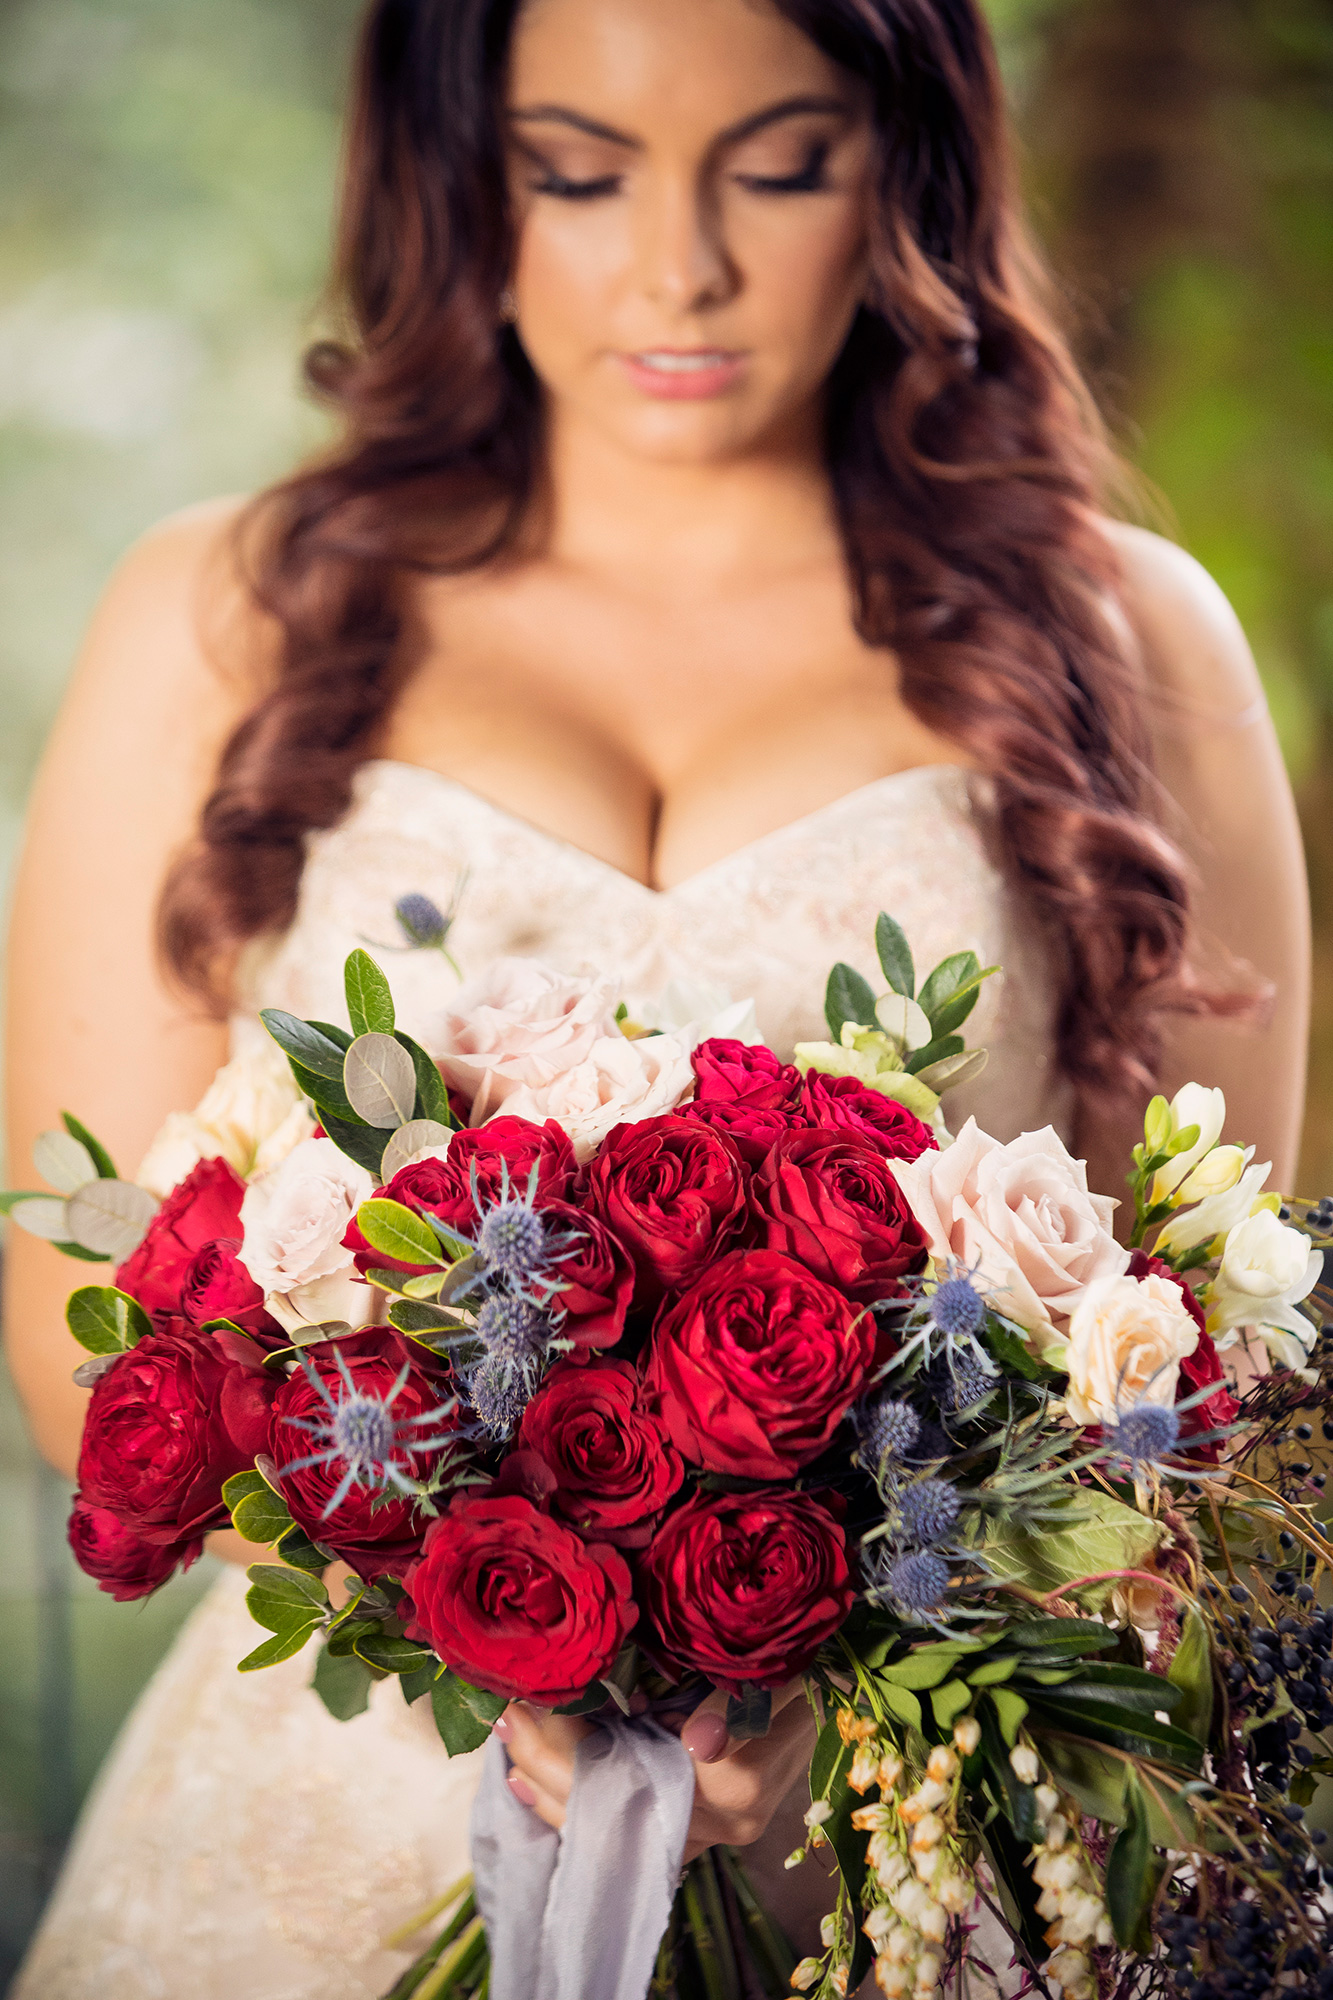 Chemere_Matthew_Enchanted-Forest-Wedding_DK-Photography_020